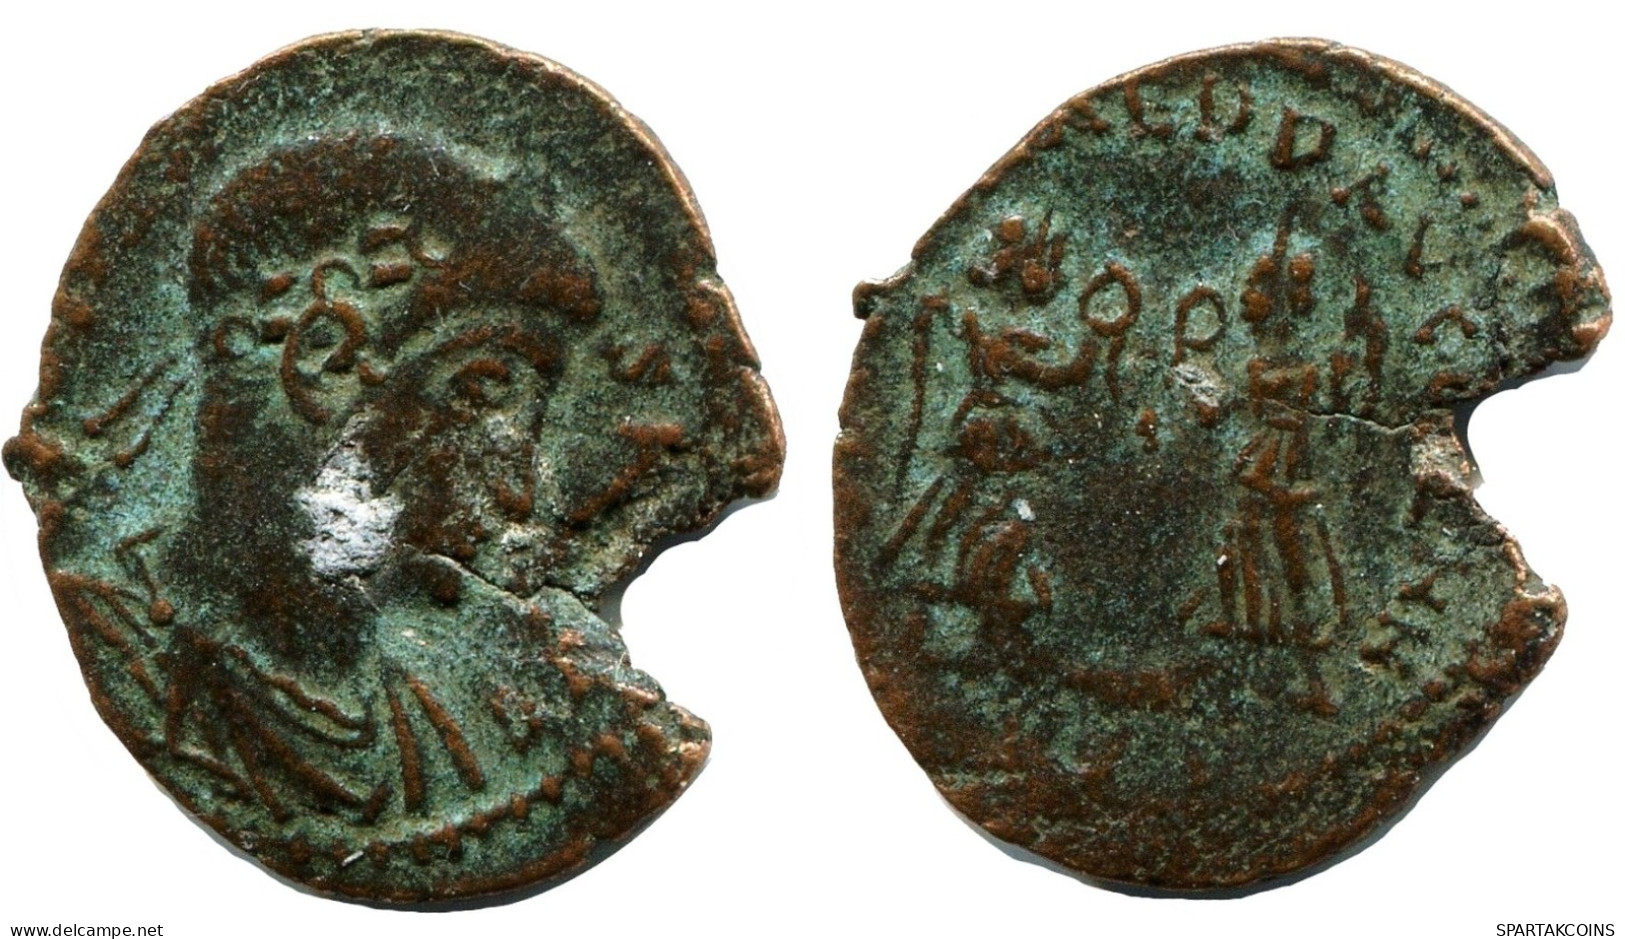 CONSTANS MINTED IN ROME ITALY FROM THE ROYAL ONTARIO MUSEUM #ANC11494.14.U.A - The Christian Empire (307 AD To 363 AD)